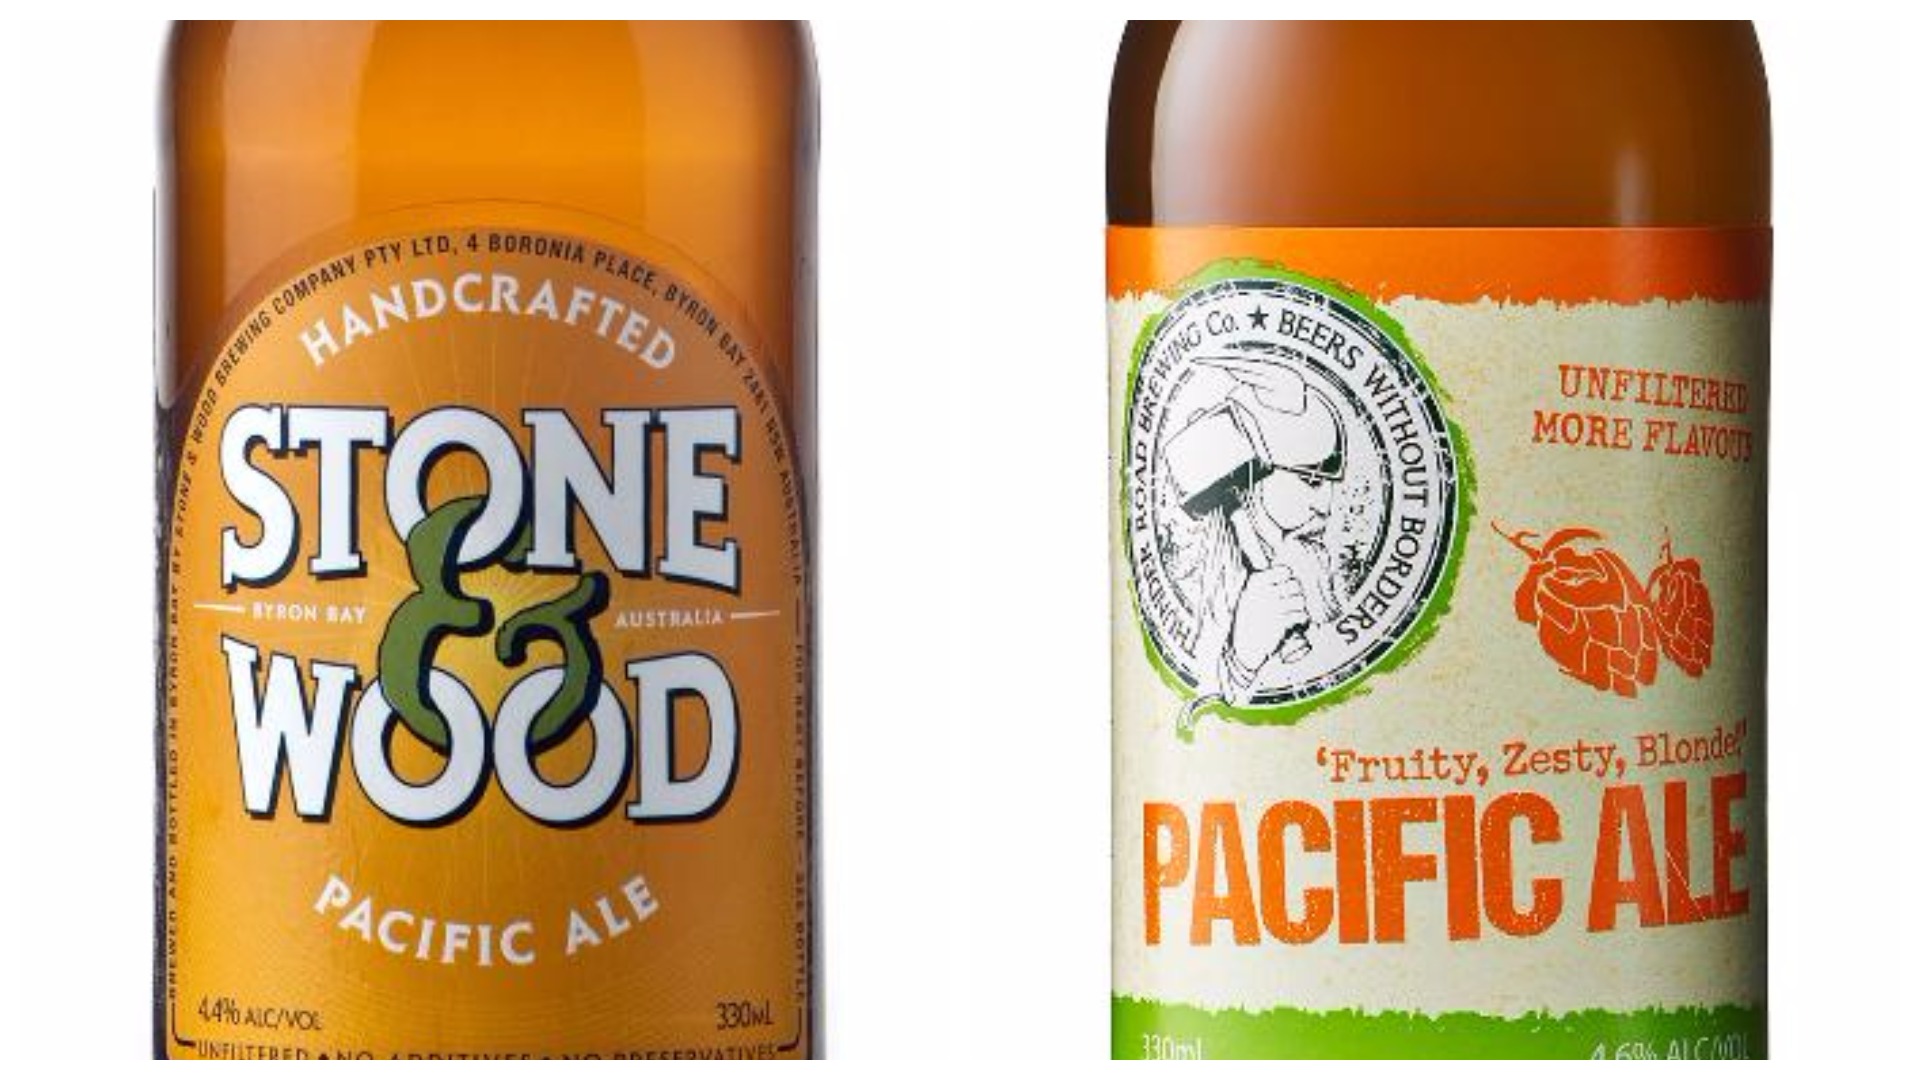 'Pacific Ale' is headed back to court